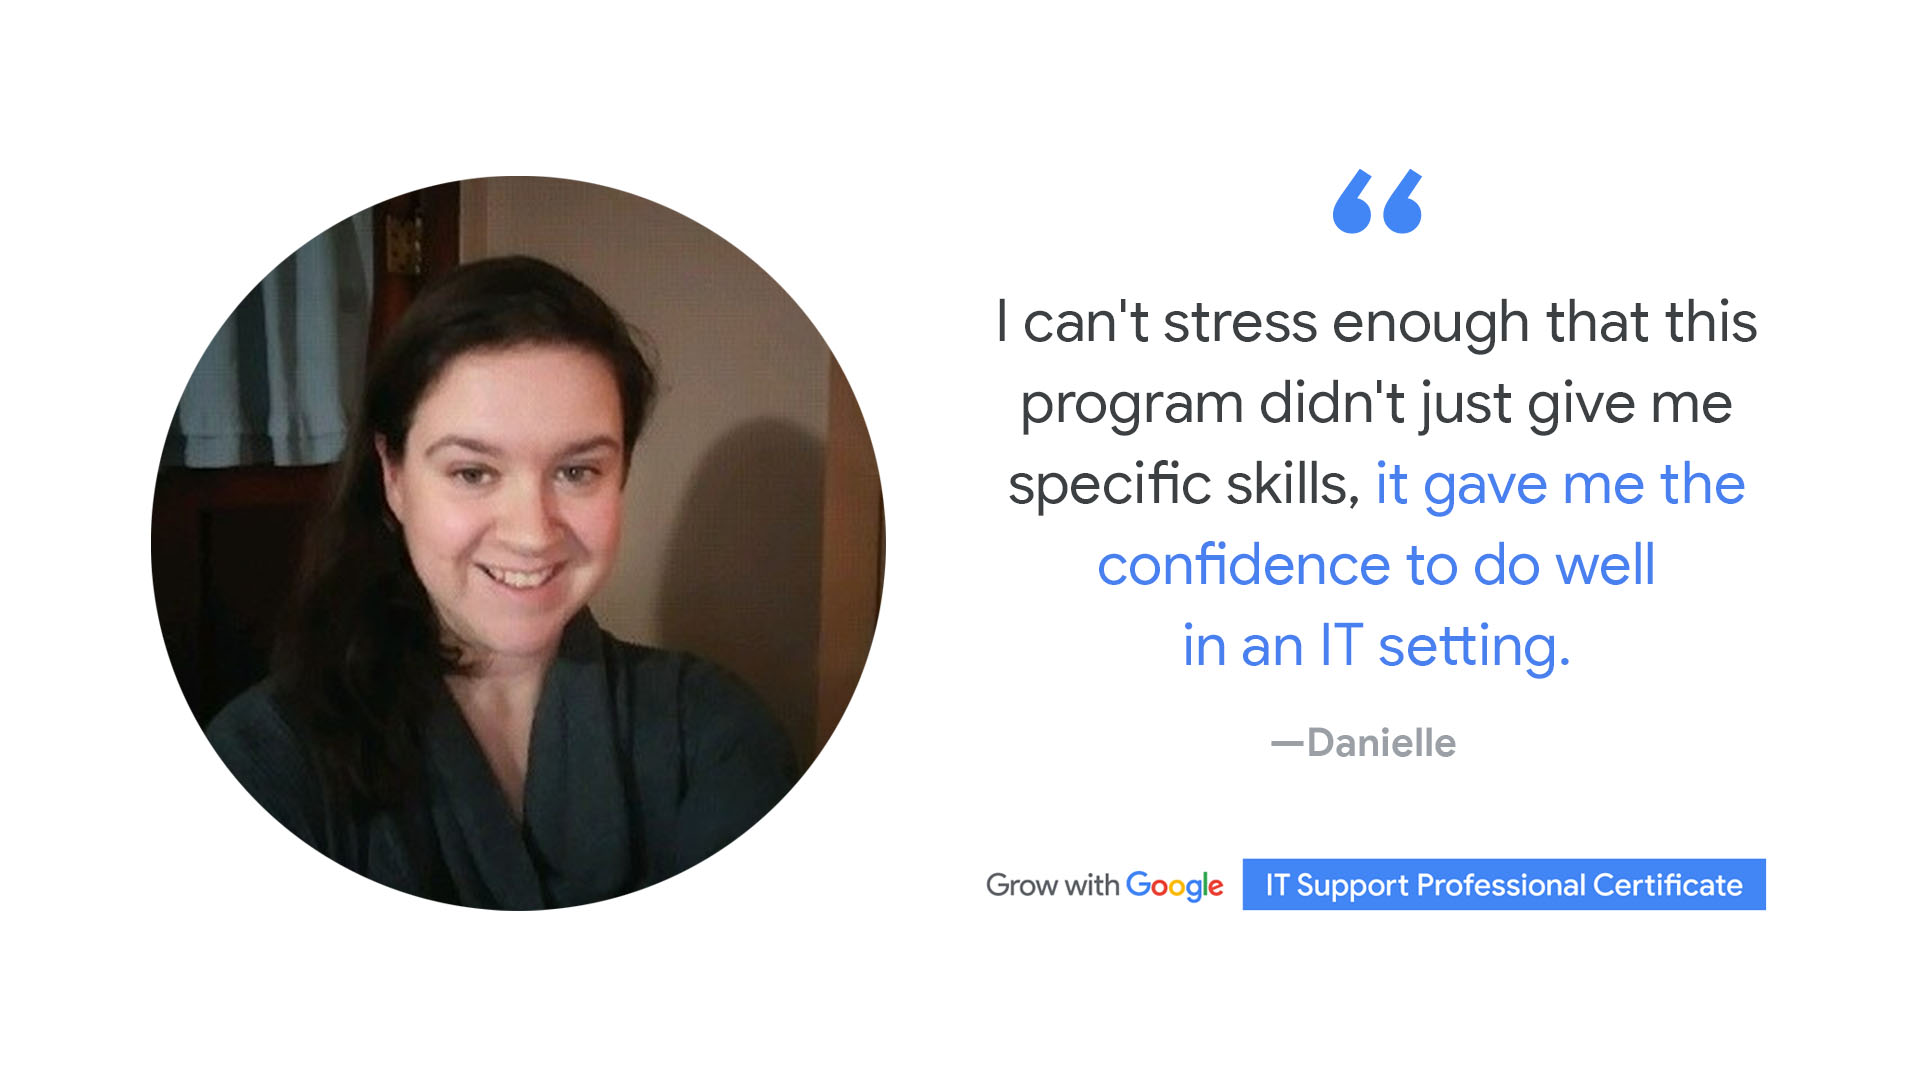 See How Danielle Advanced in Her IT Role with the Google IT Support Professional Certificate